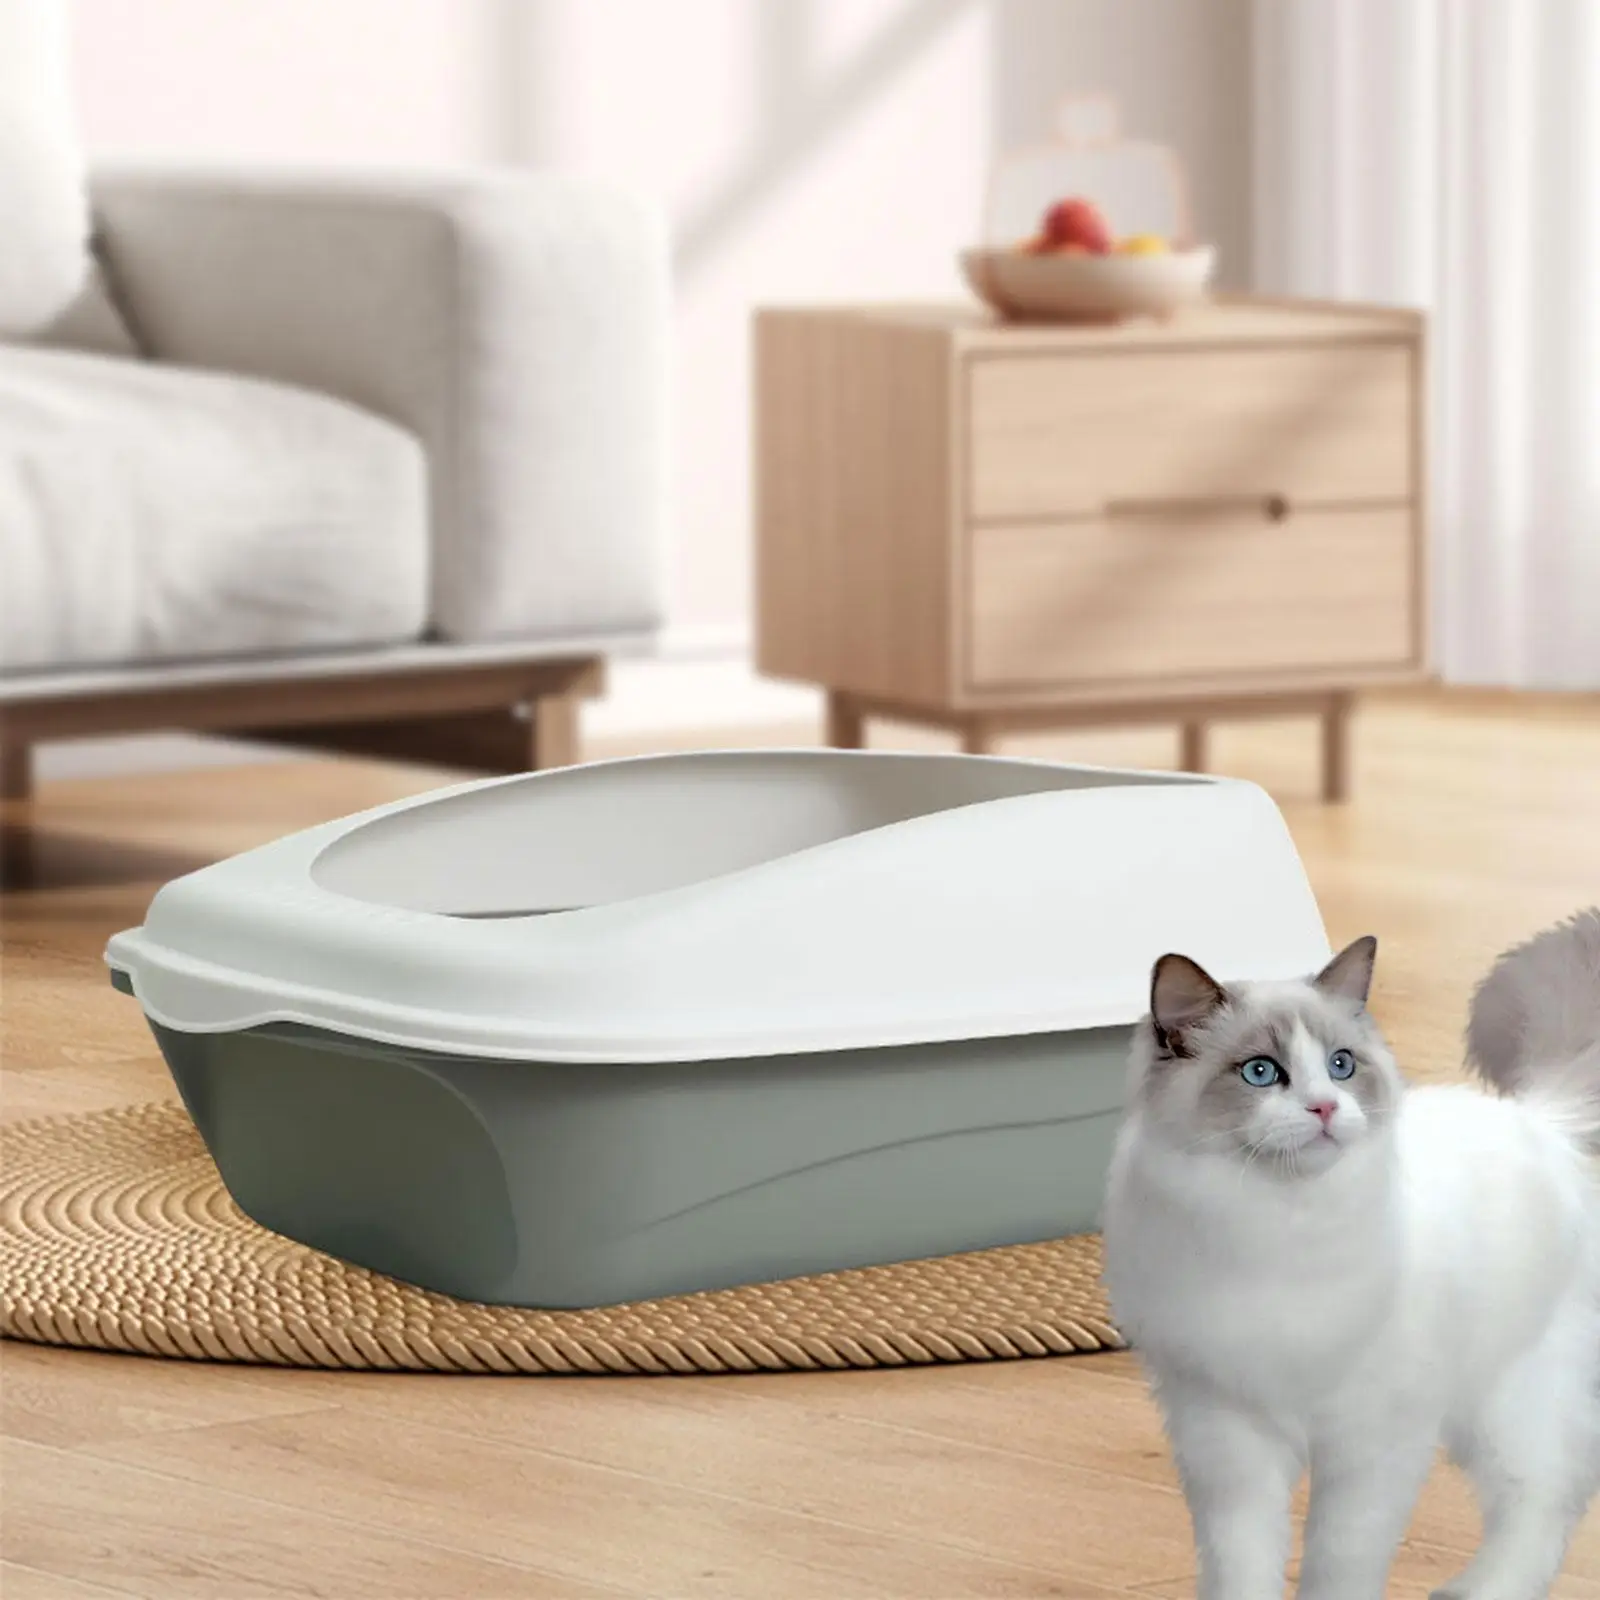 Pet Litter Trays with High Sides Easy to Clean Potty Toilet Pet Supplies for Hamsters Kitten Indoor Cats Bunny Small Animals